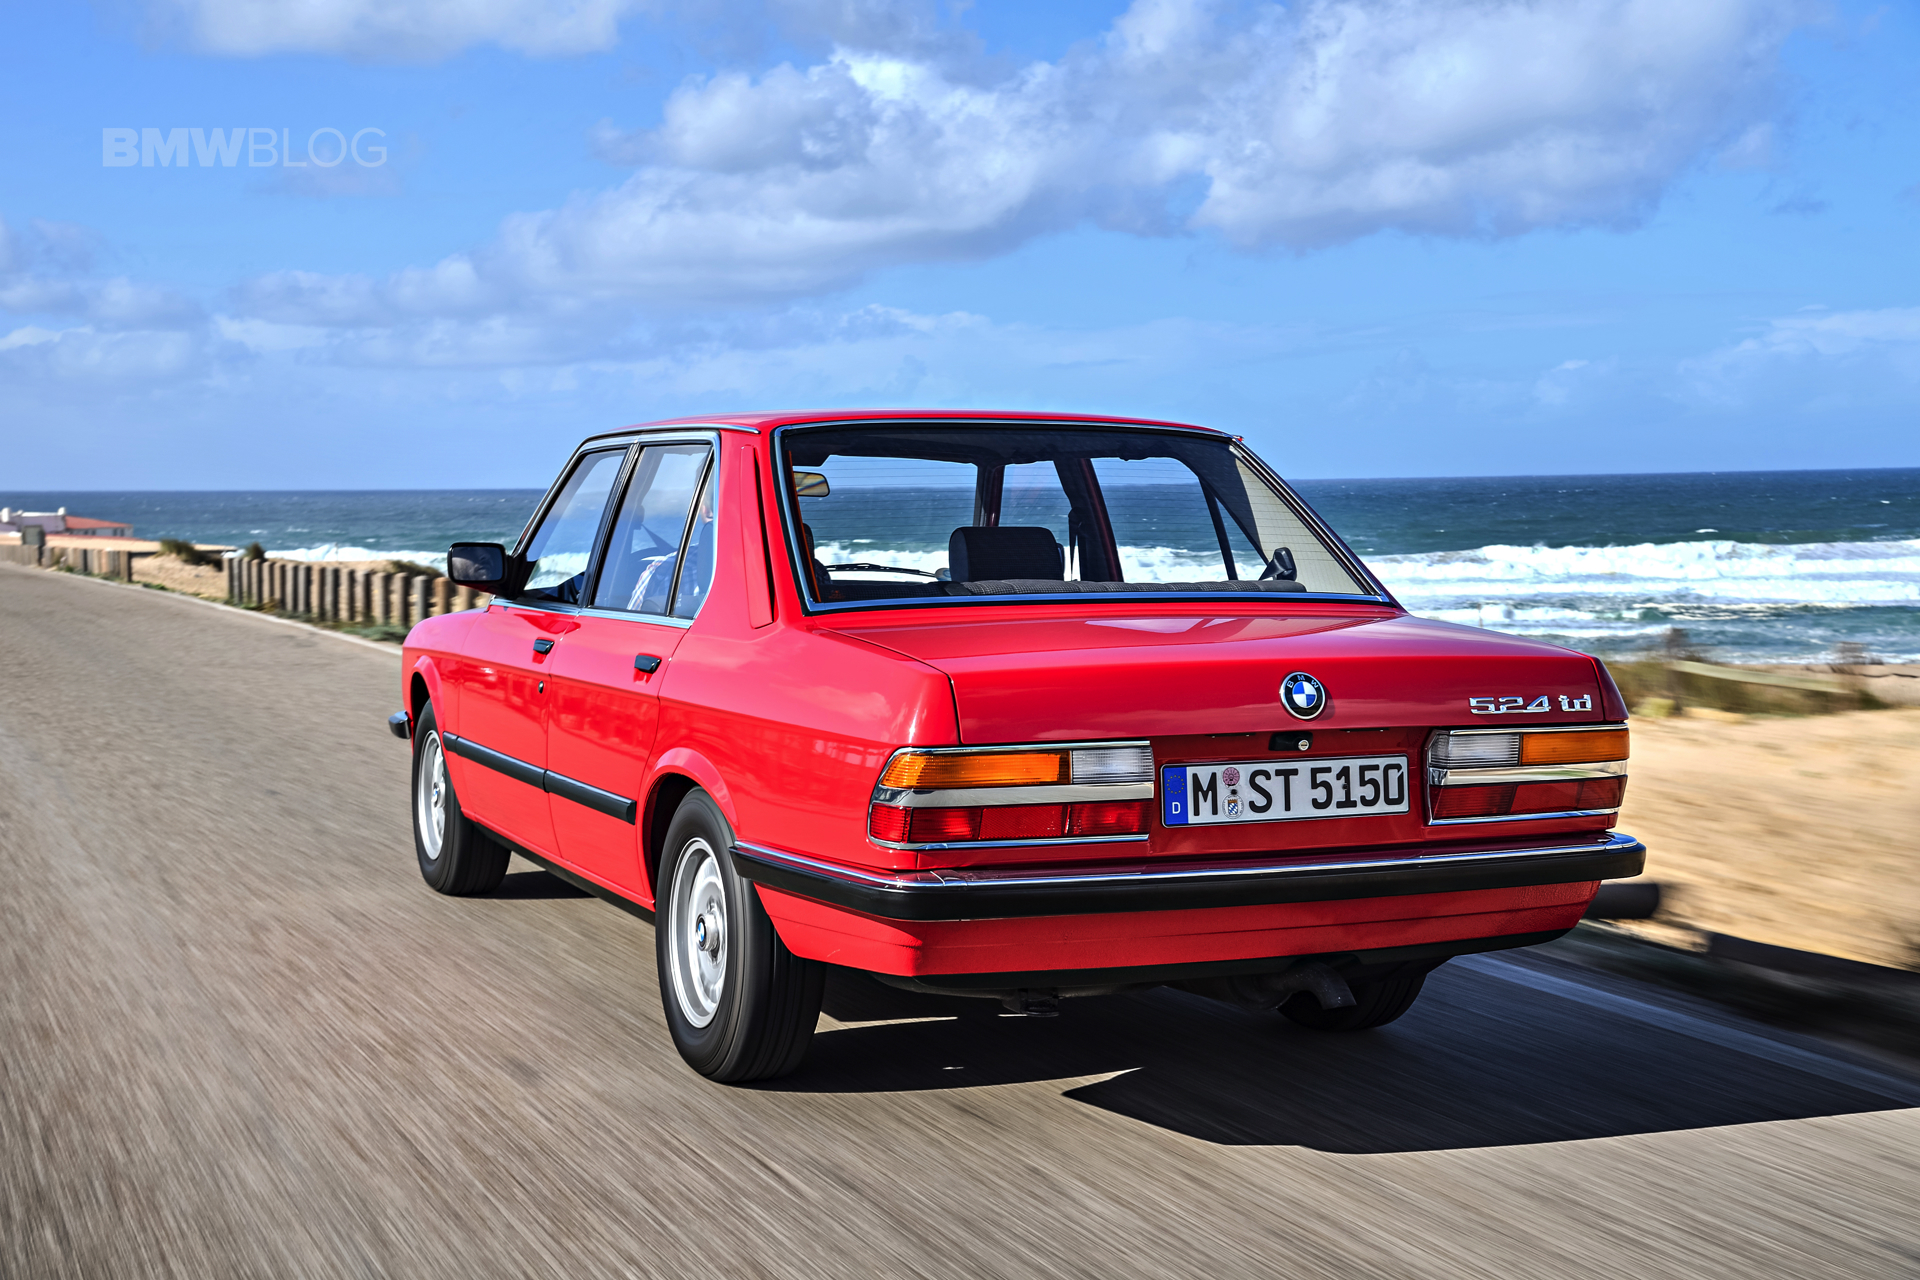 BMW 5 Series History - The 2nd Generation (E28)